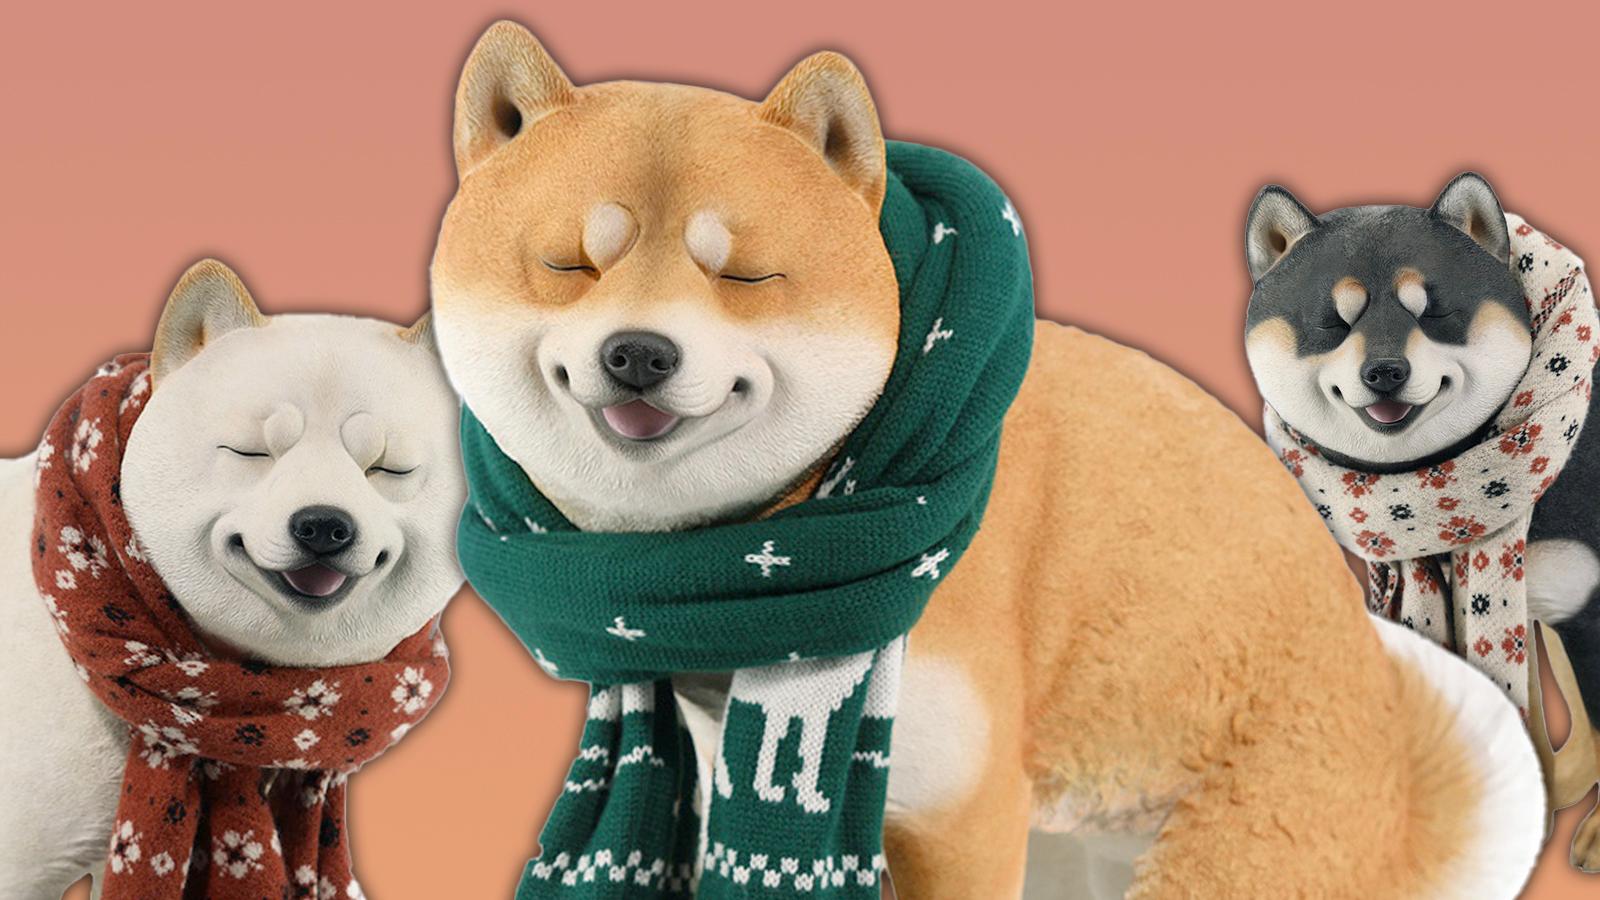 three statues of shiba inus smiling as they poop on a brown background